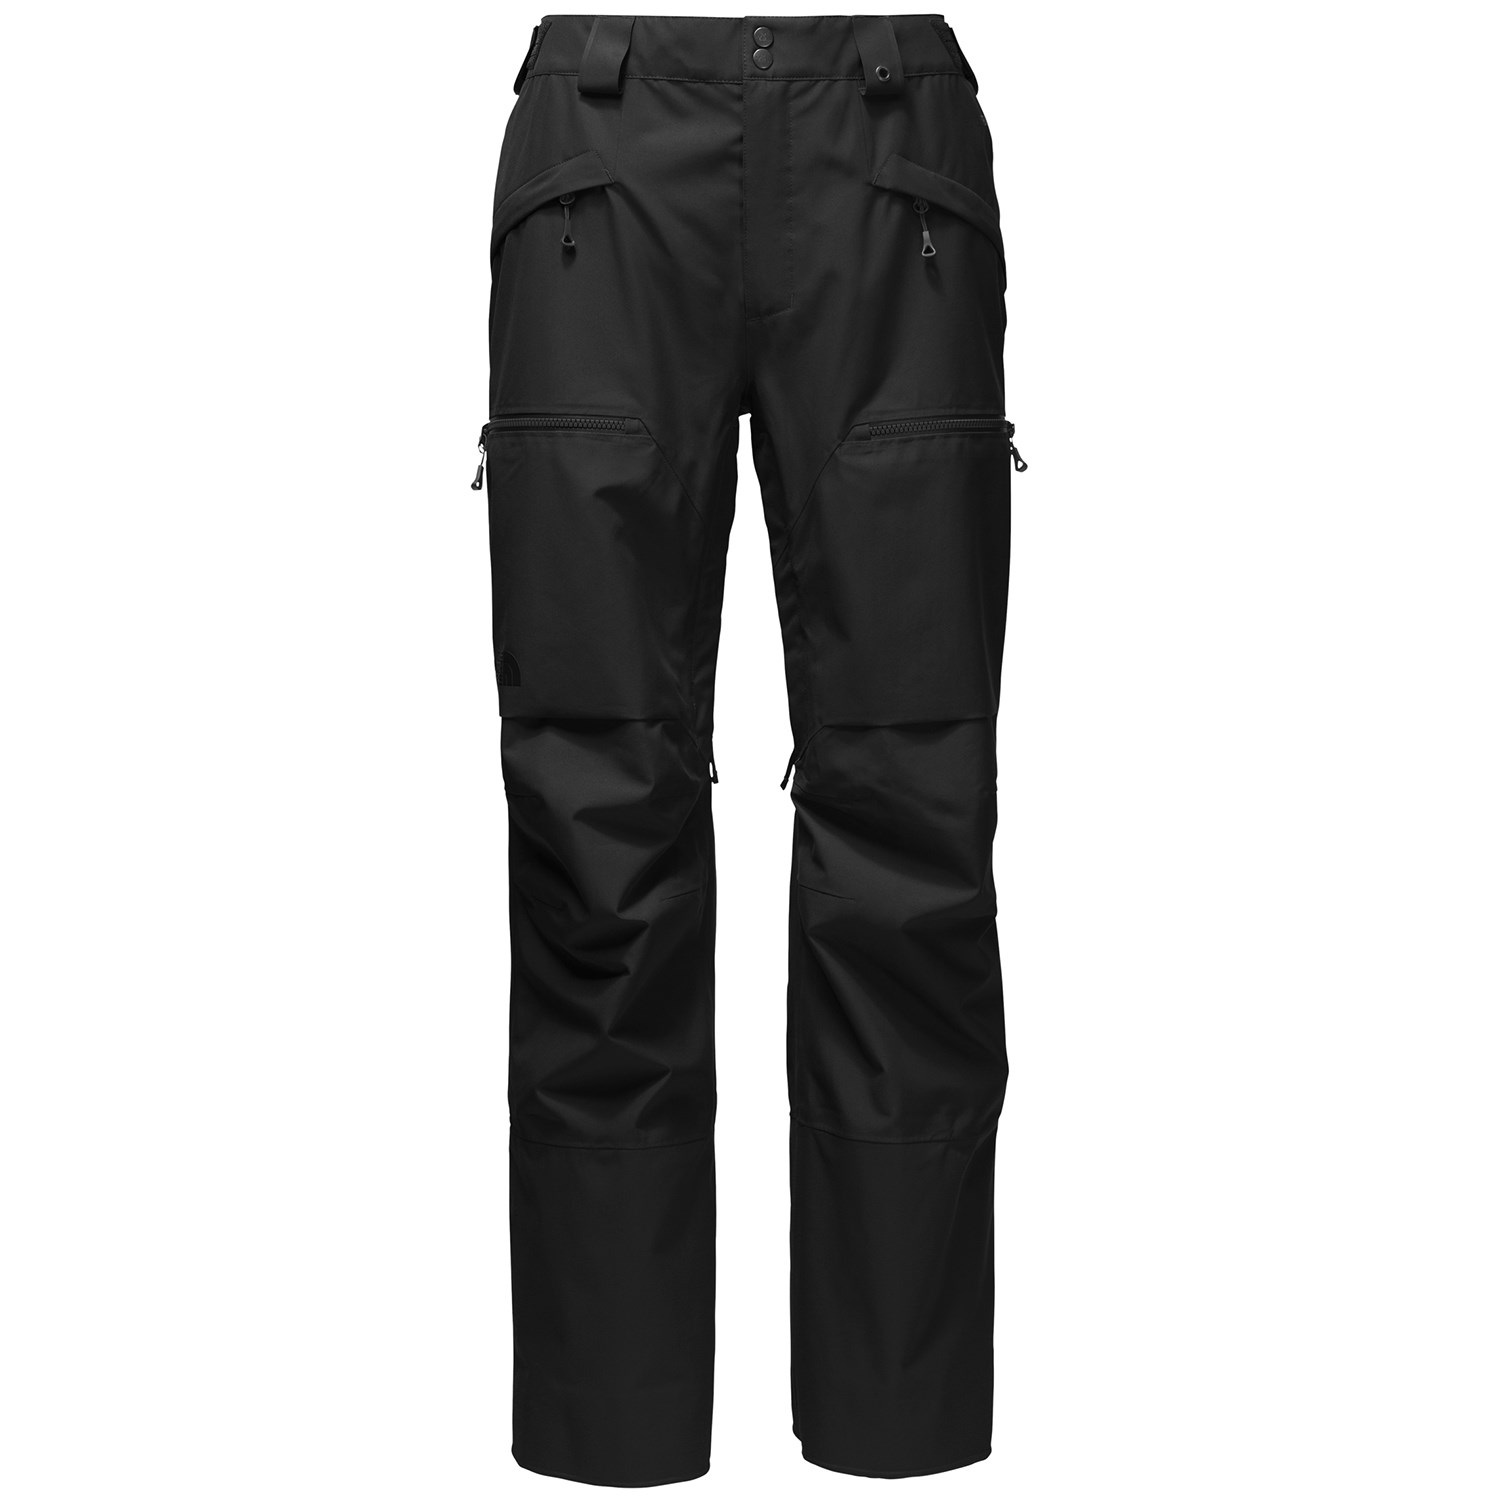 north face powder guide pants review